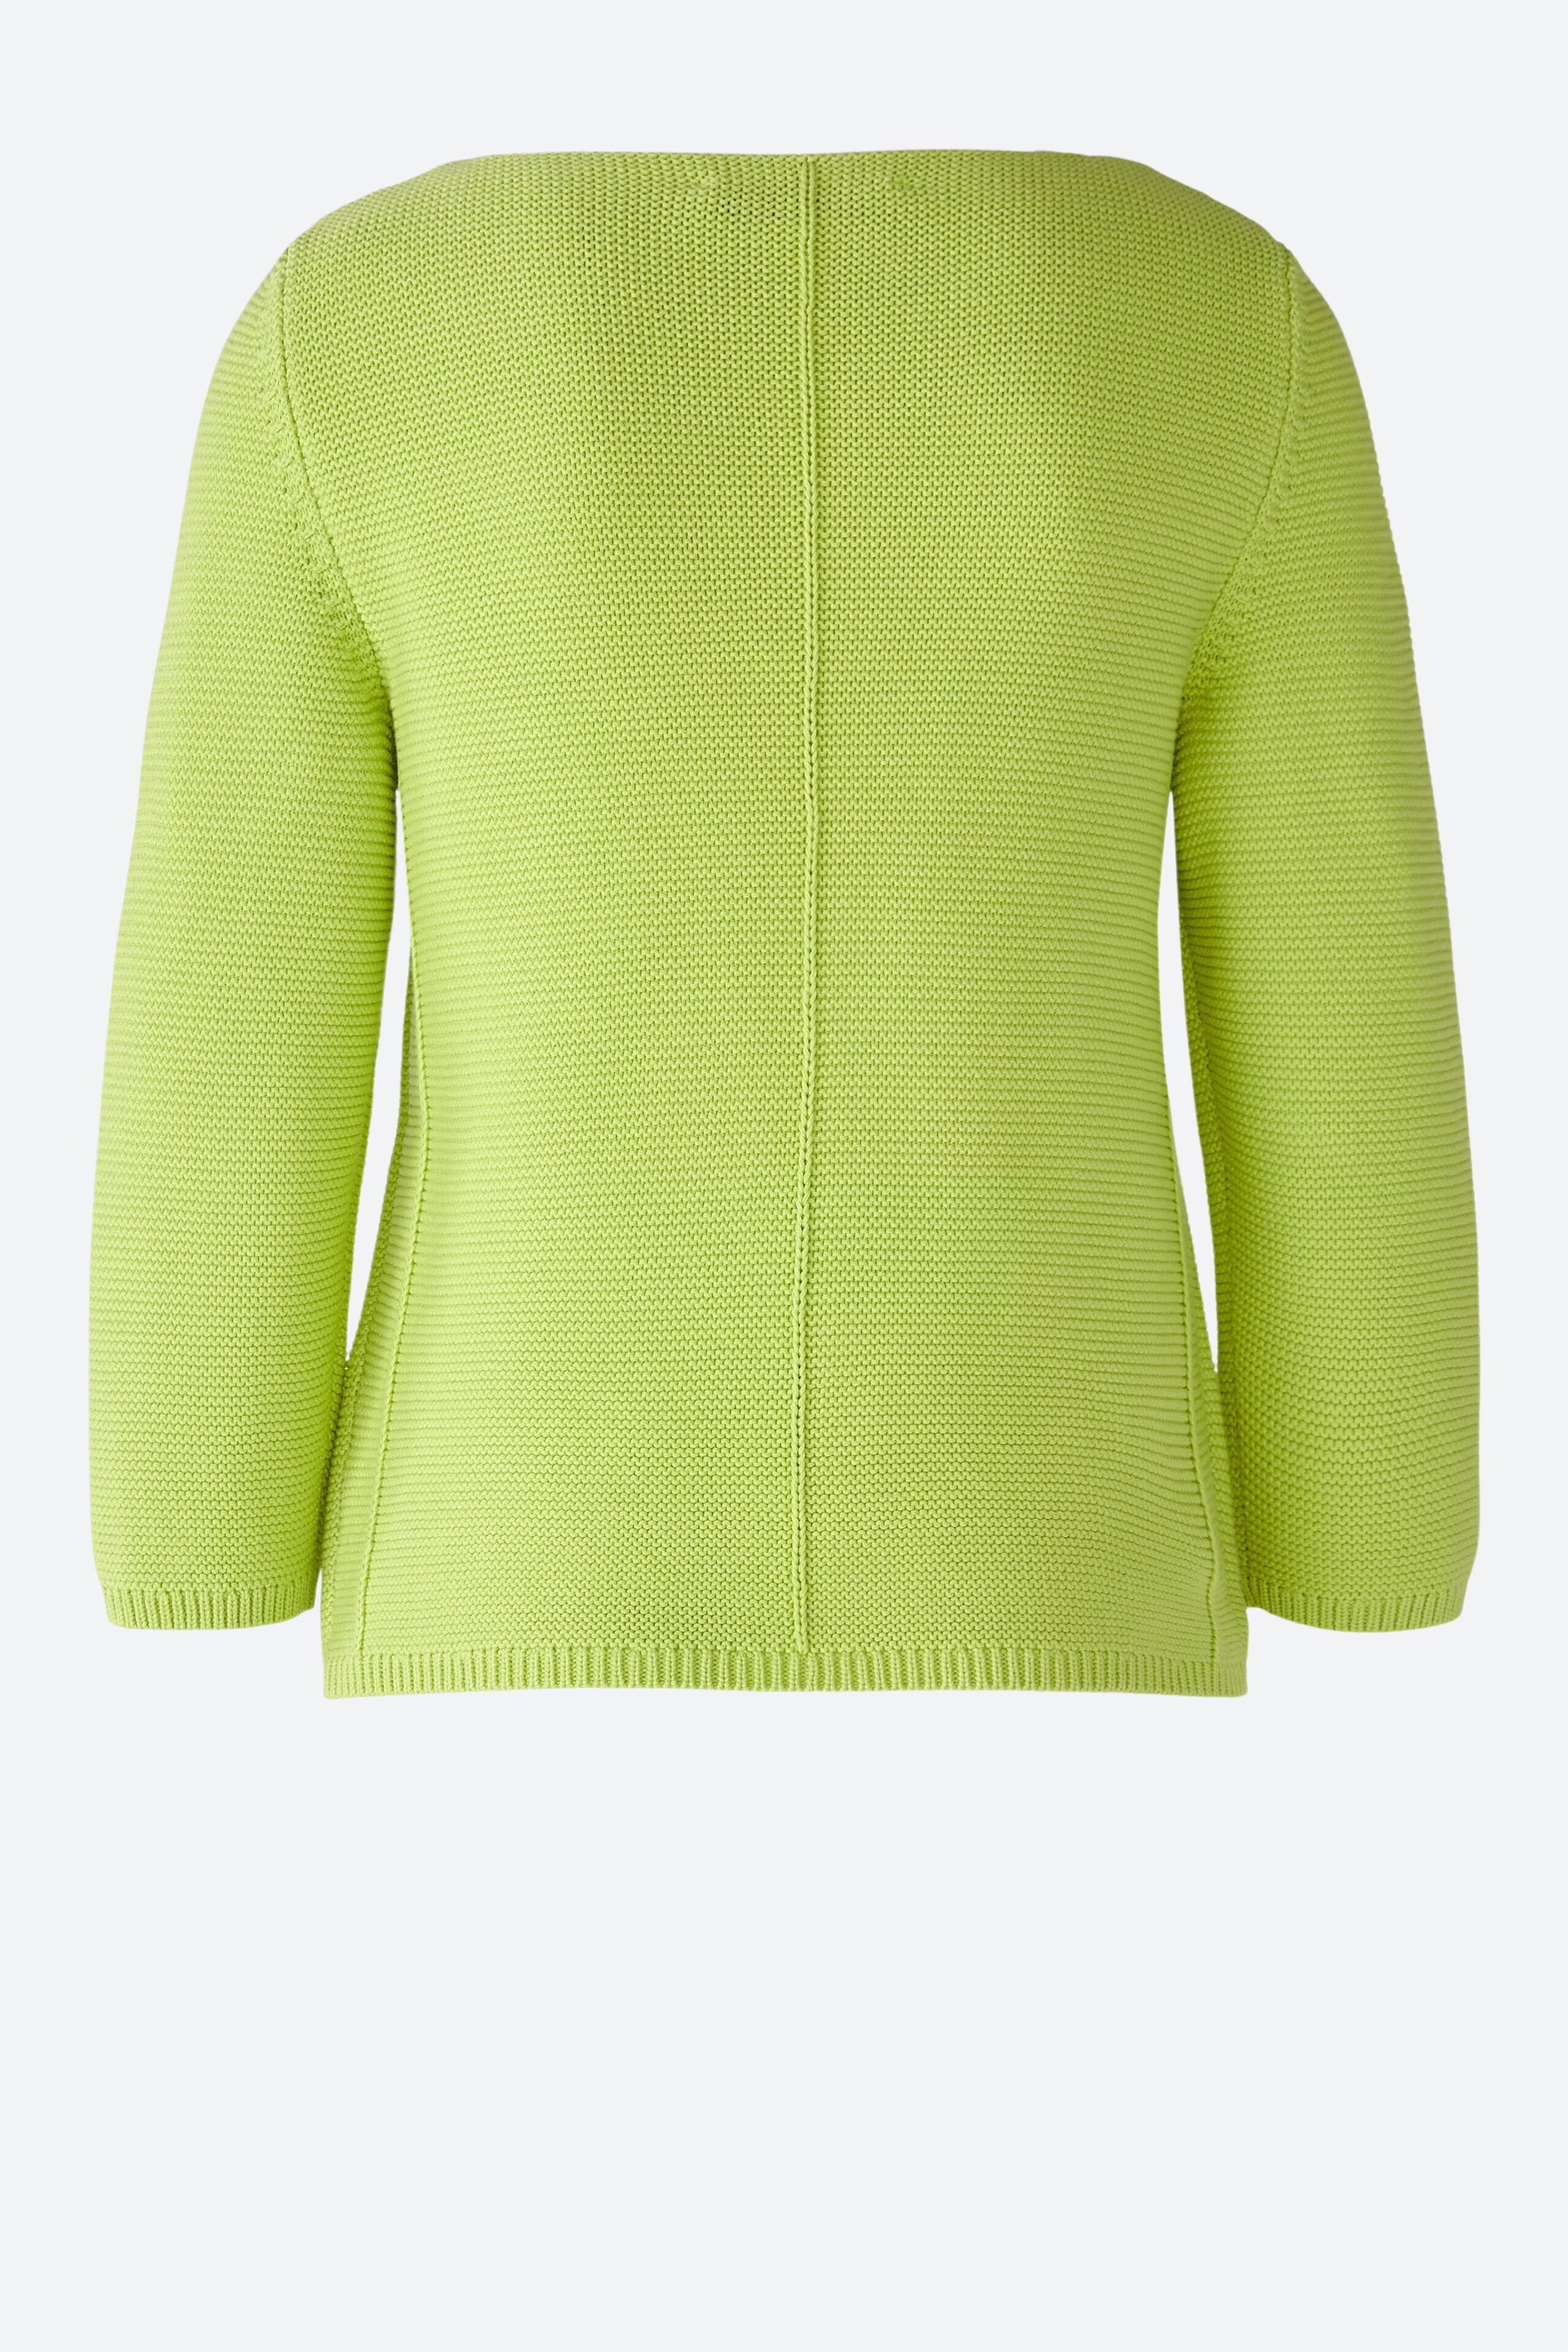 3/4 Sleeve Jumper in Lime